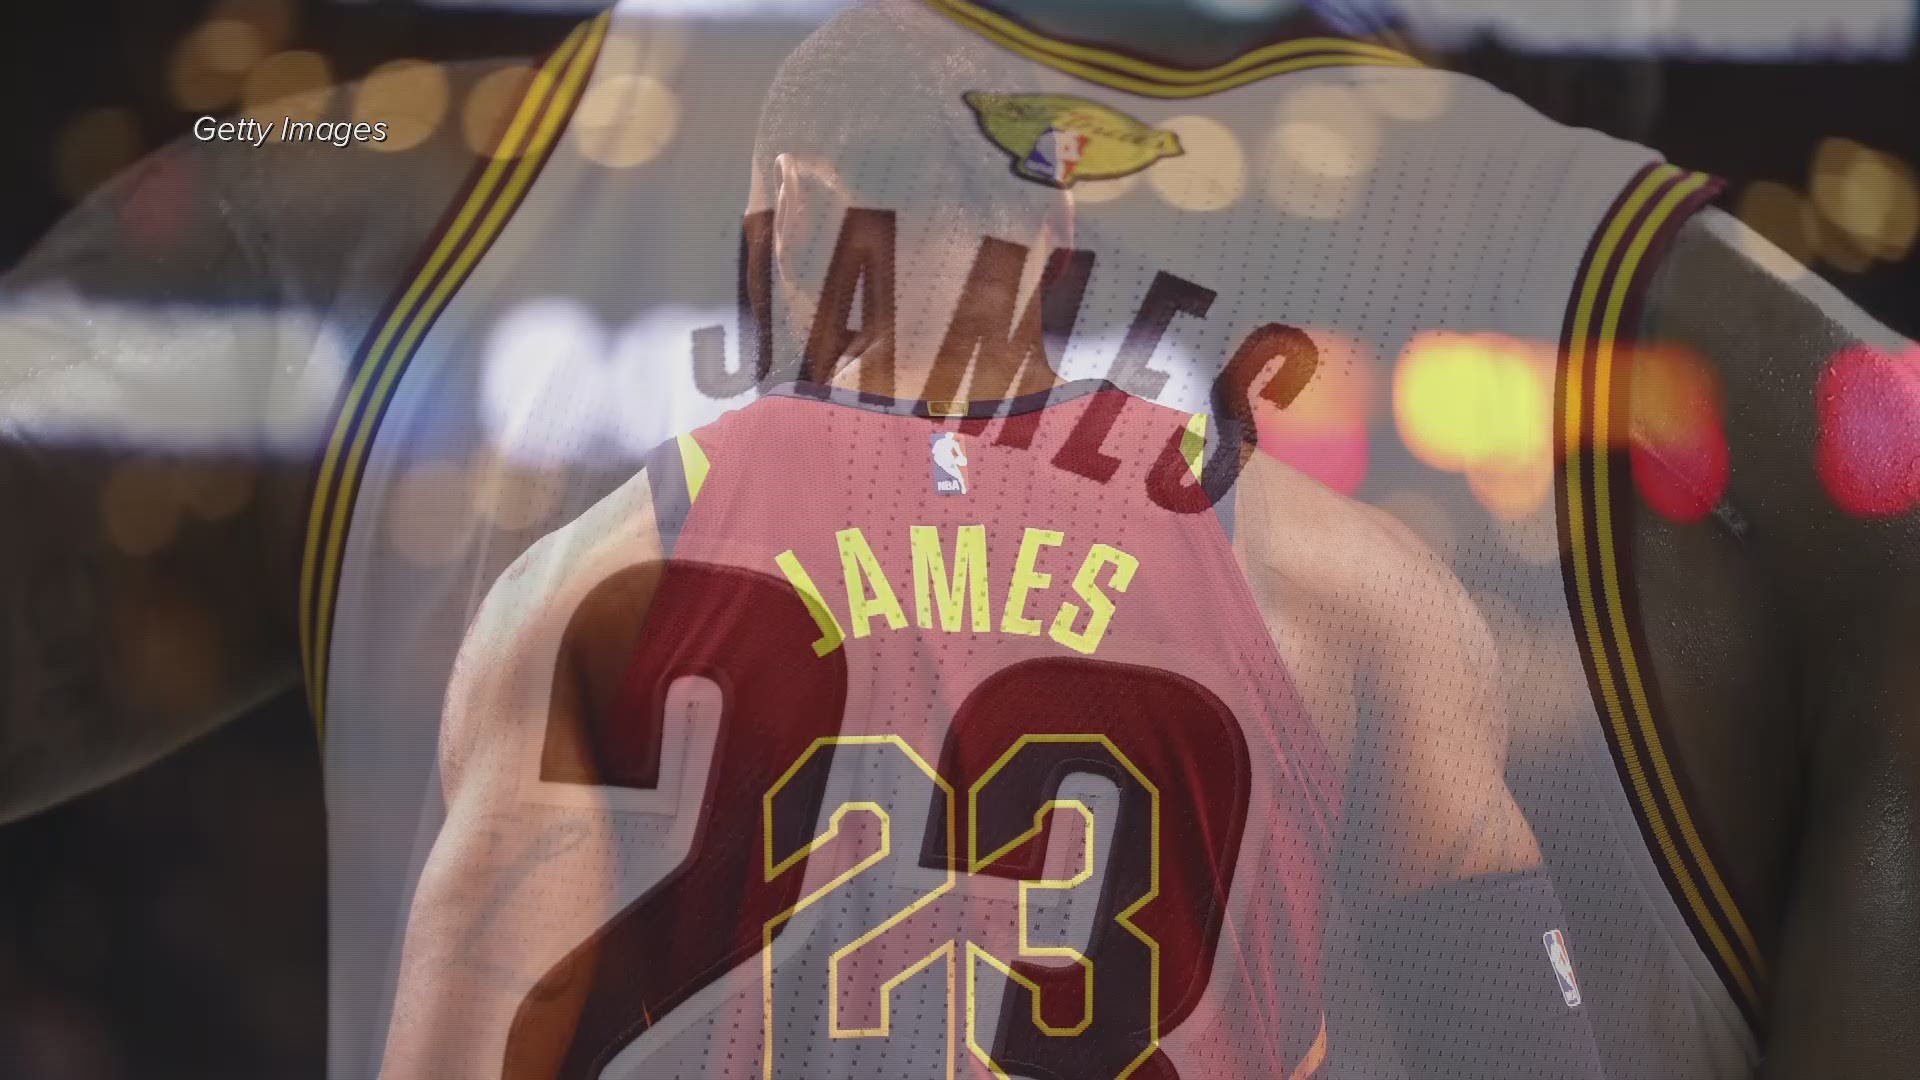 Official Cleveland Cavaliers Jersey James: Buy Online on Offer